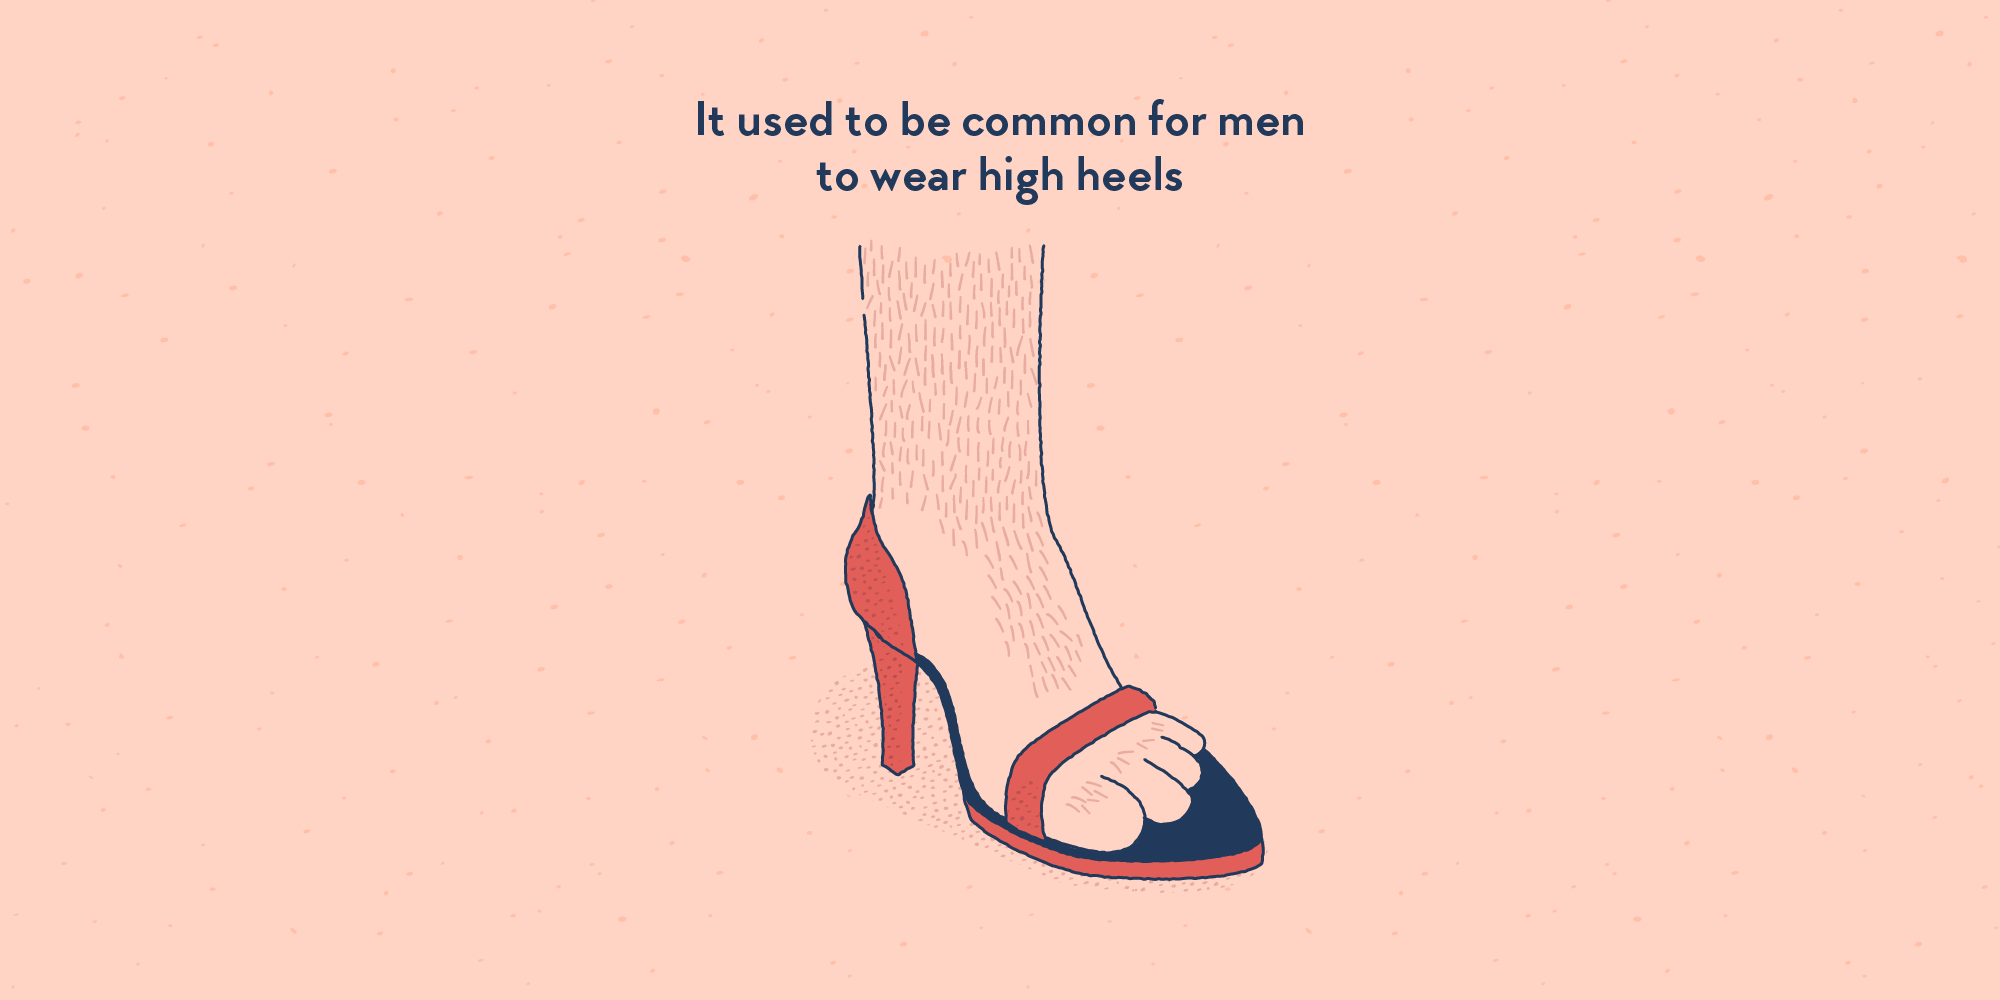 A hairy leg and foot wearing a high-heeled shoe.